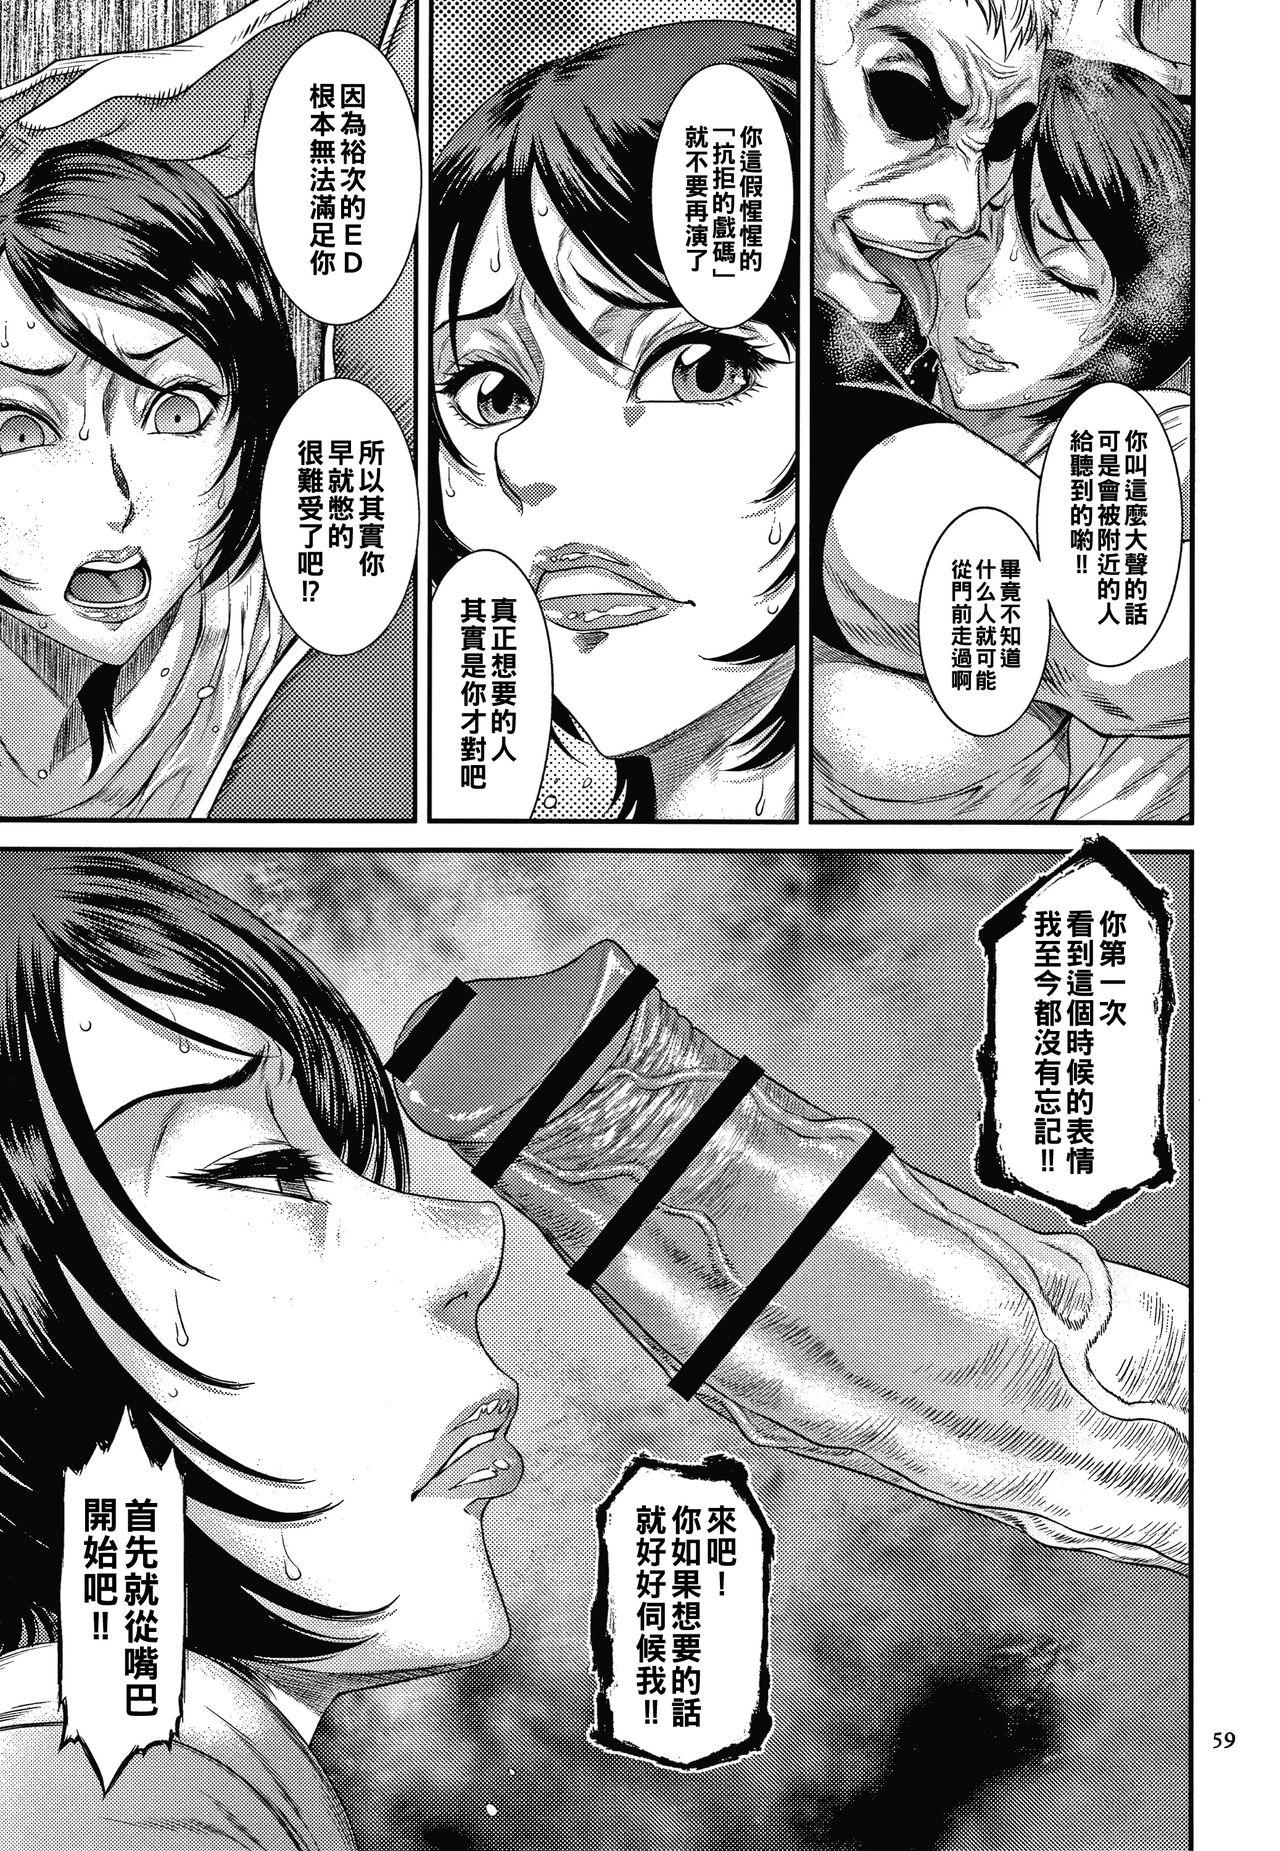 Longhair 罪悪感と快楽主義（Chinese） Deep Throat - Page 7